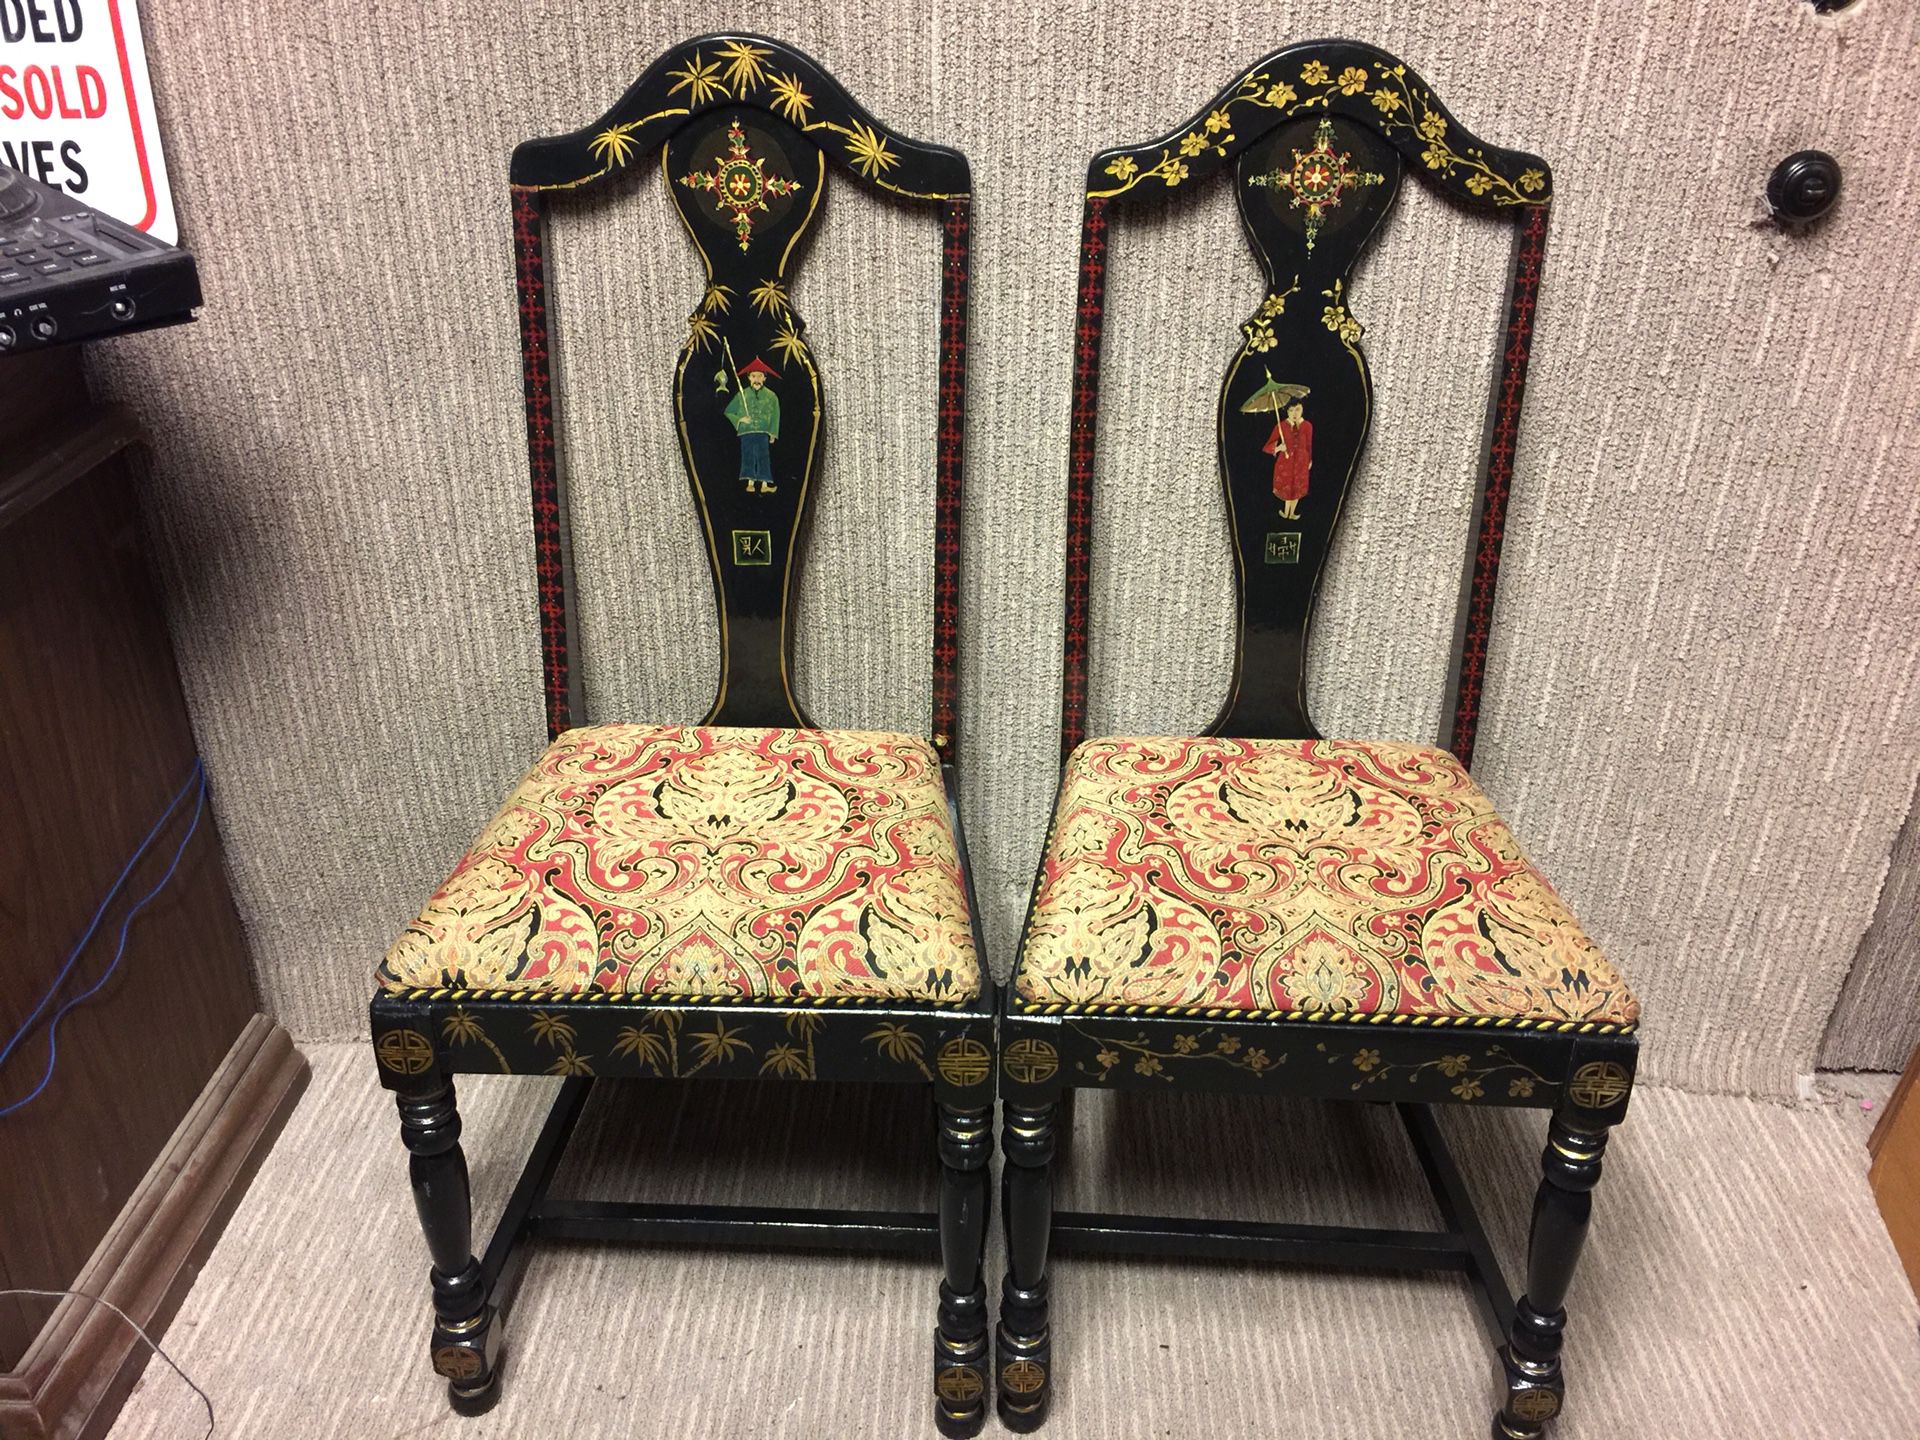 Hand painted Asian chairs